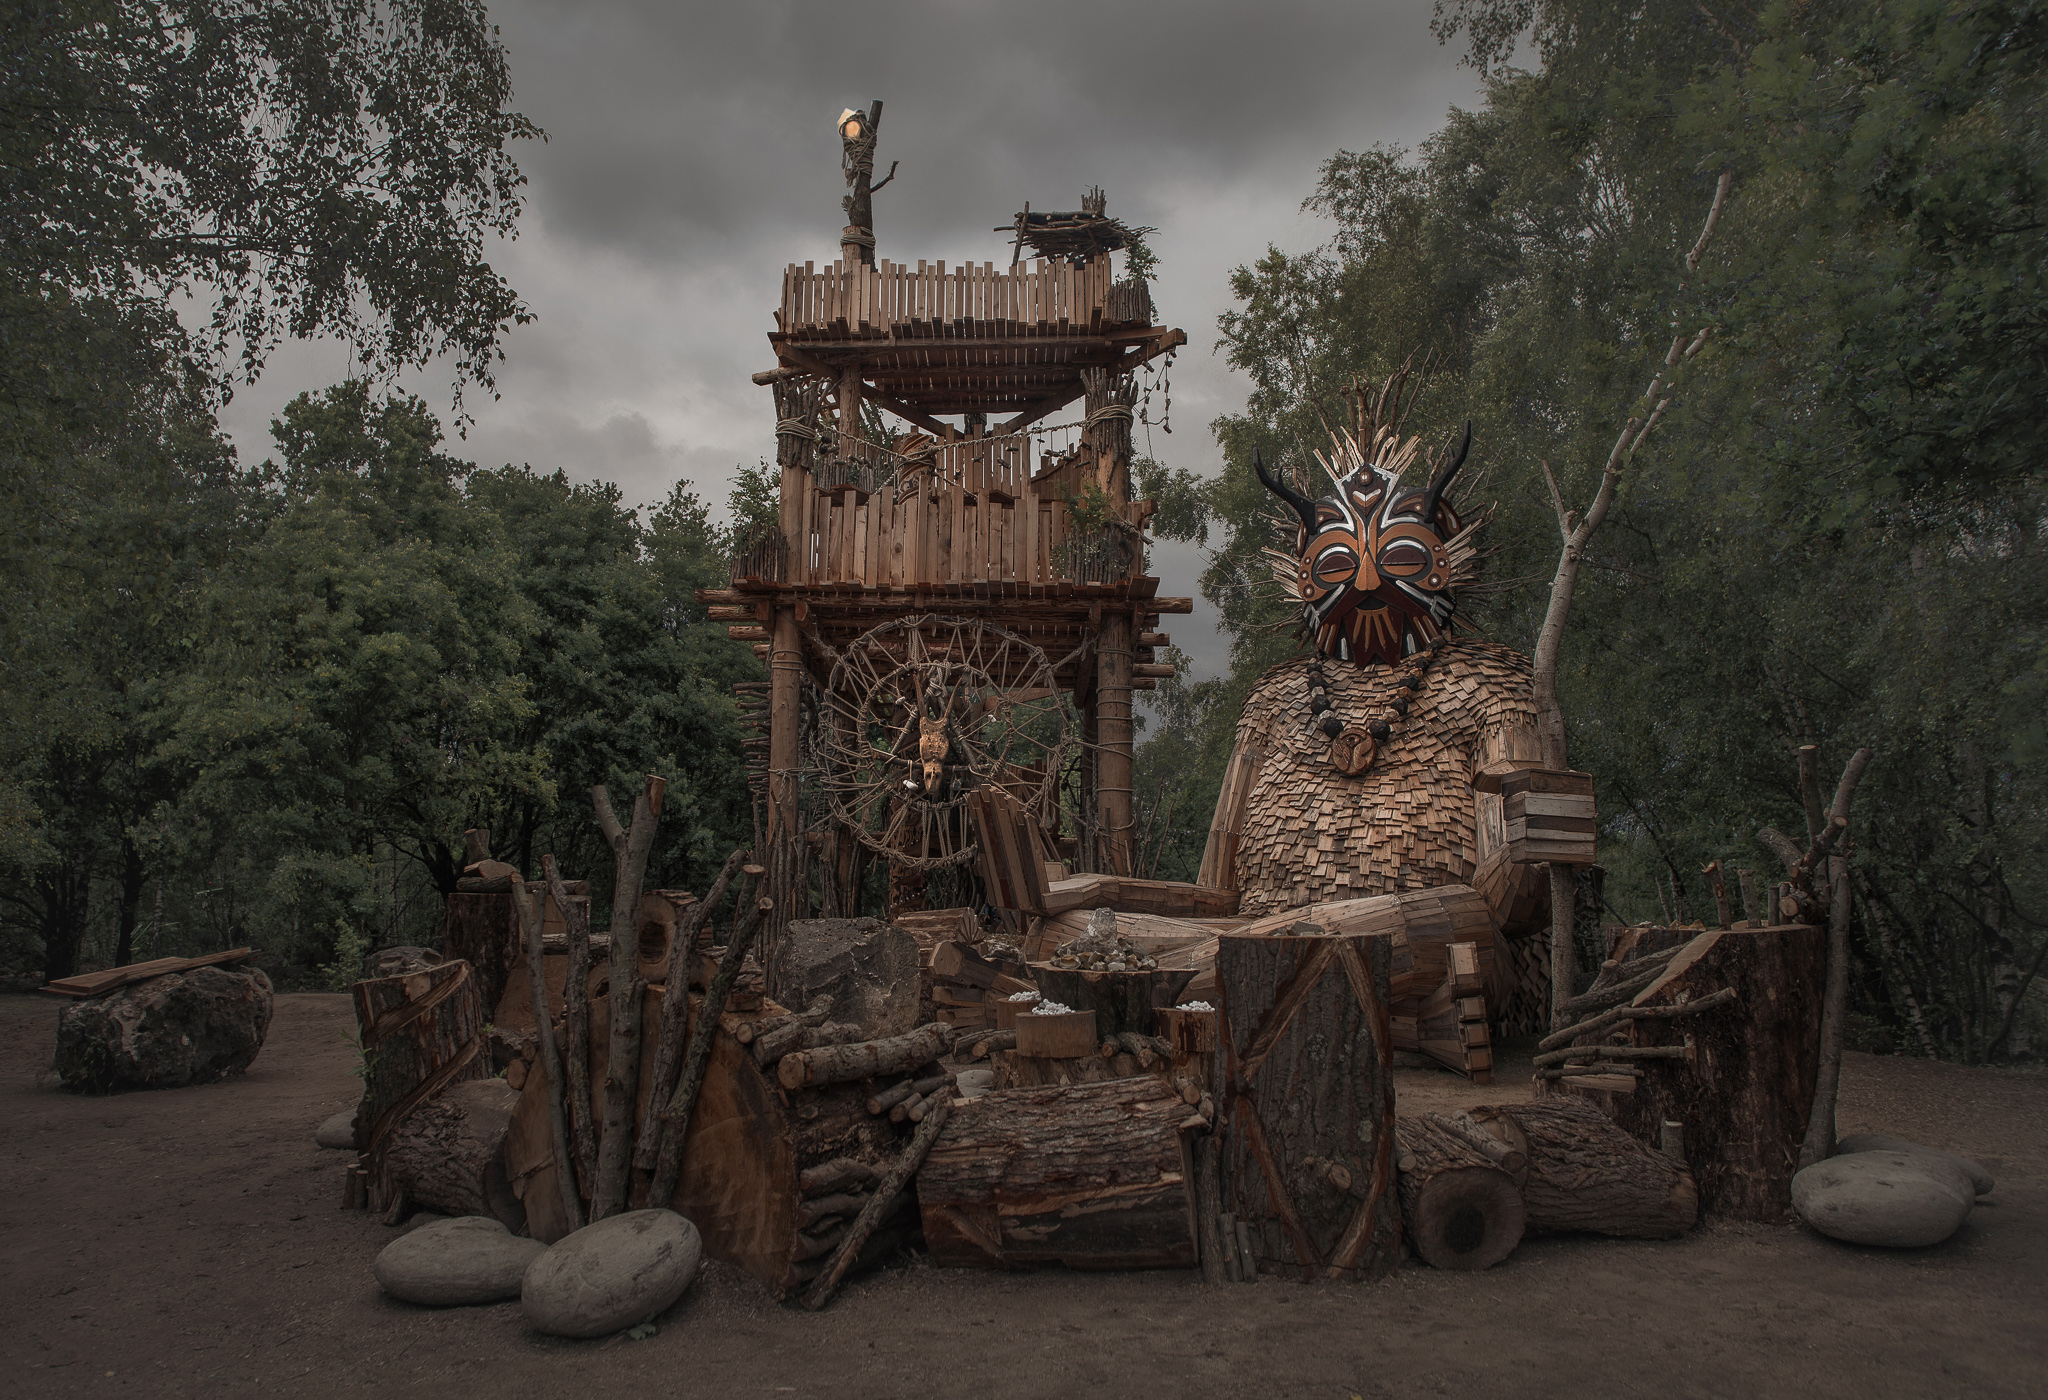 The 7 trolls are from 18 to 7 meter long. The tower is 17 meters tall. It took Dambo and a crew of 15 people around 25 weeks to build it. The wood is mainly old shelves from a supermarket, pallets, and branches from fallen trees. It is located in a Belgian forest.